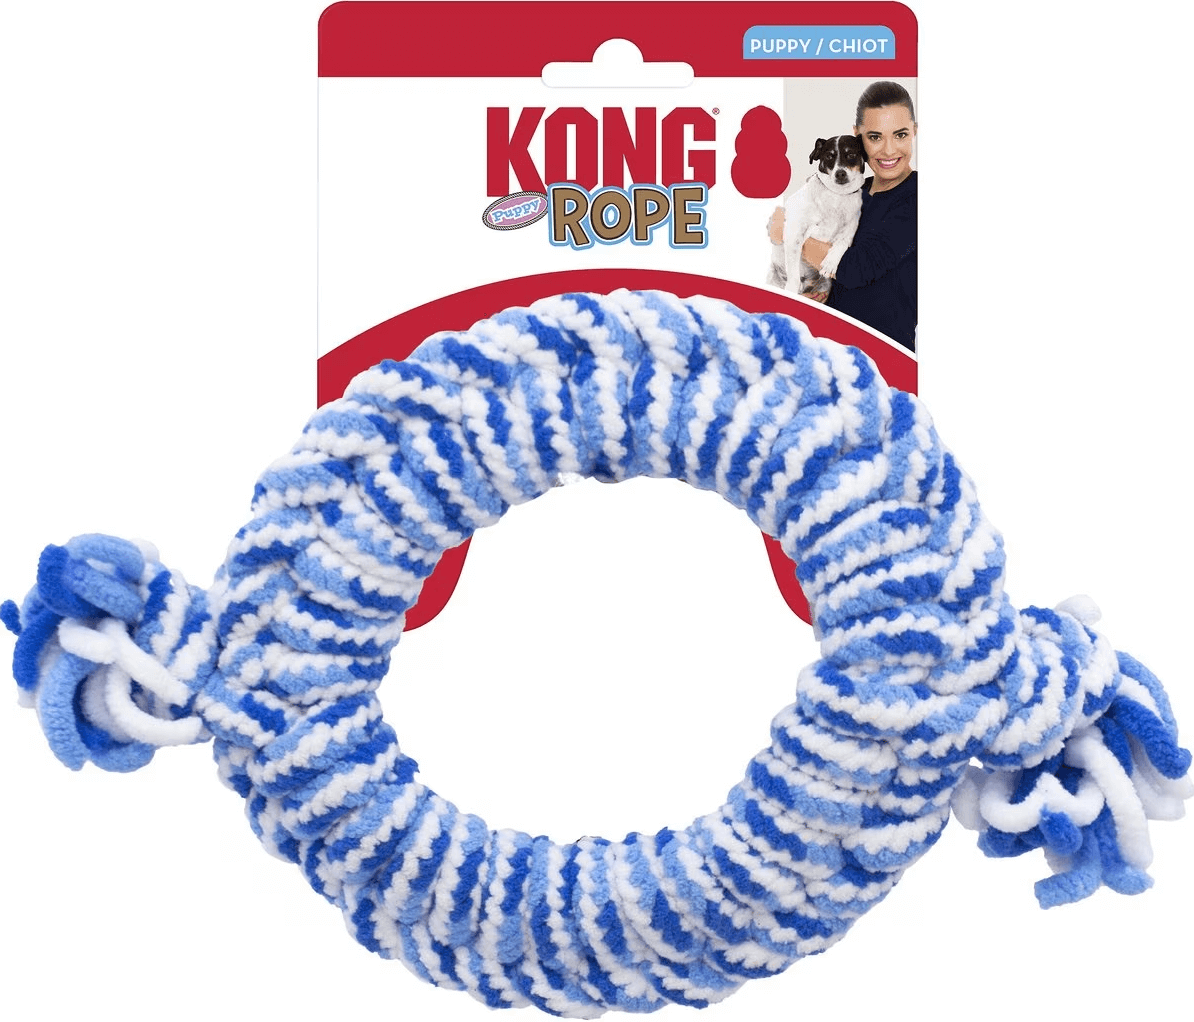 KONG - Rope (For Puppy)